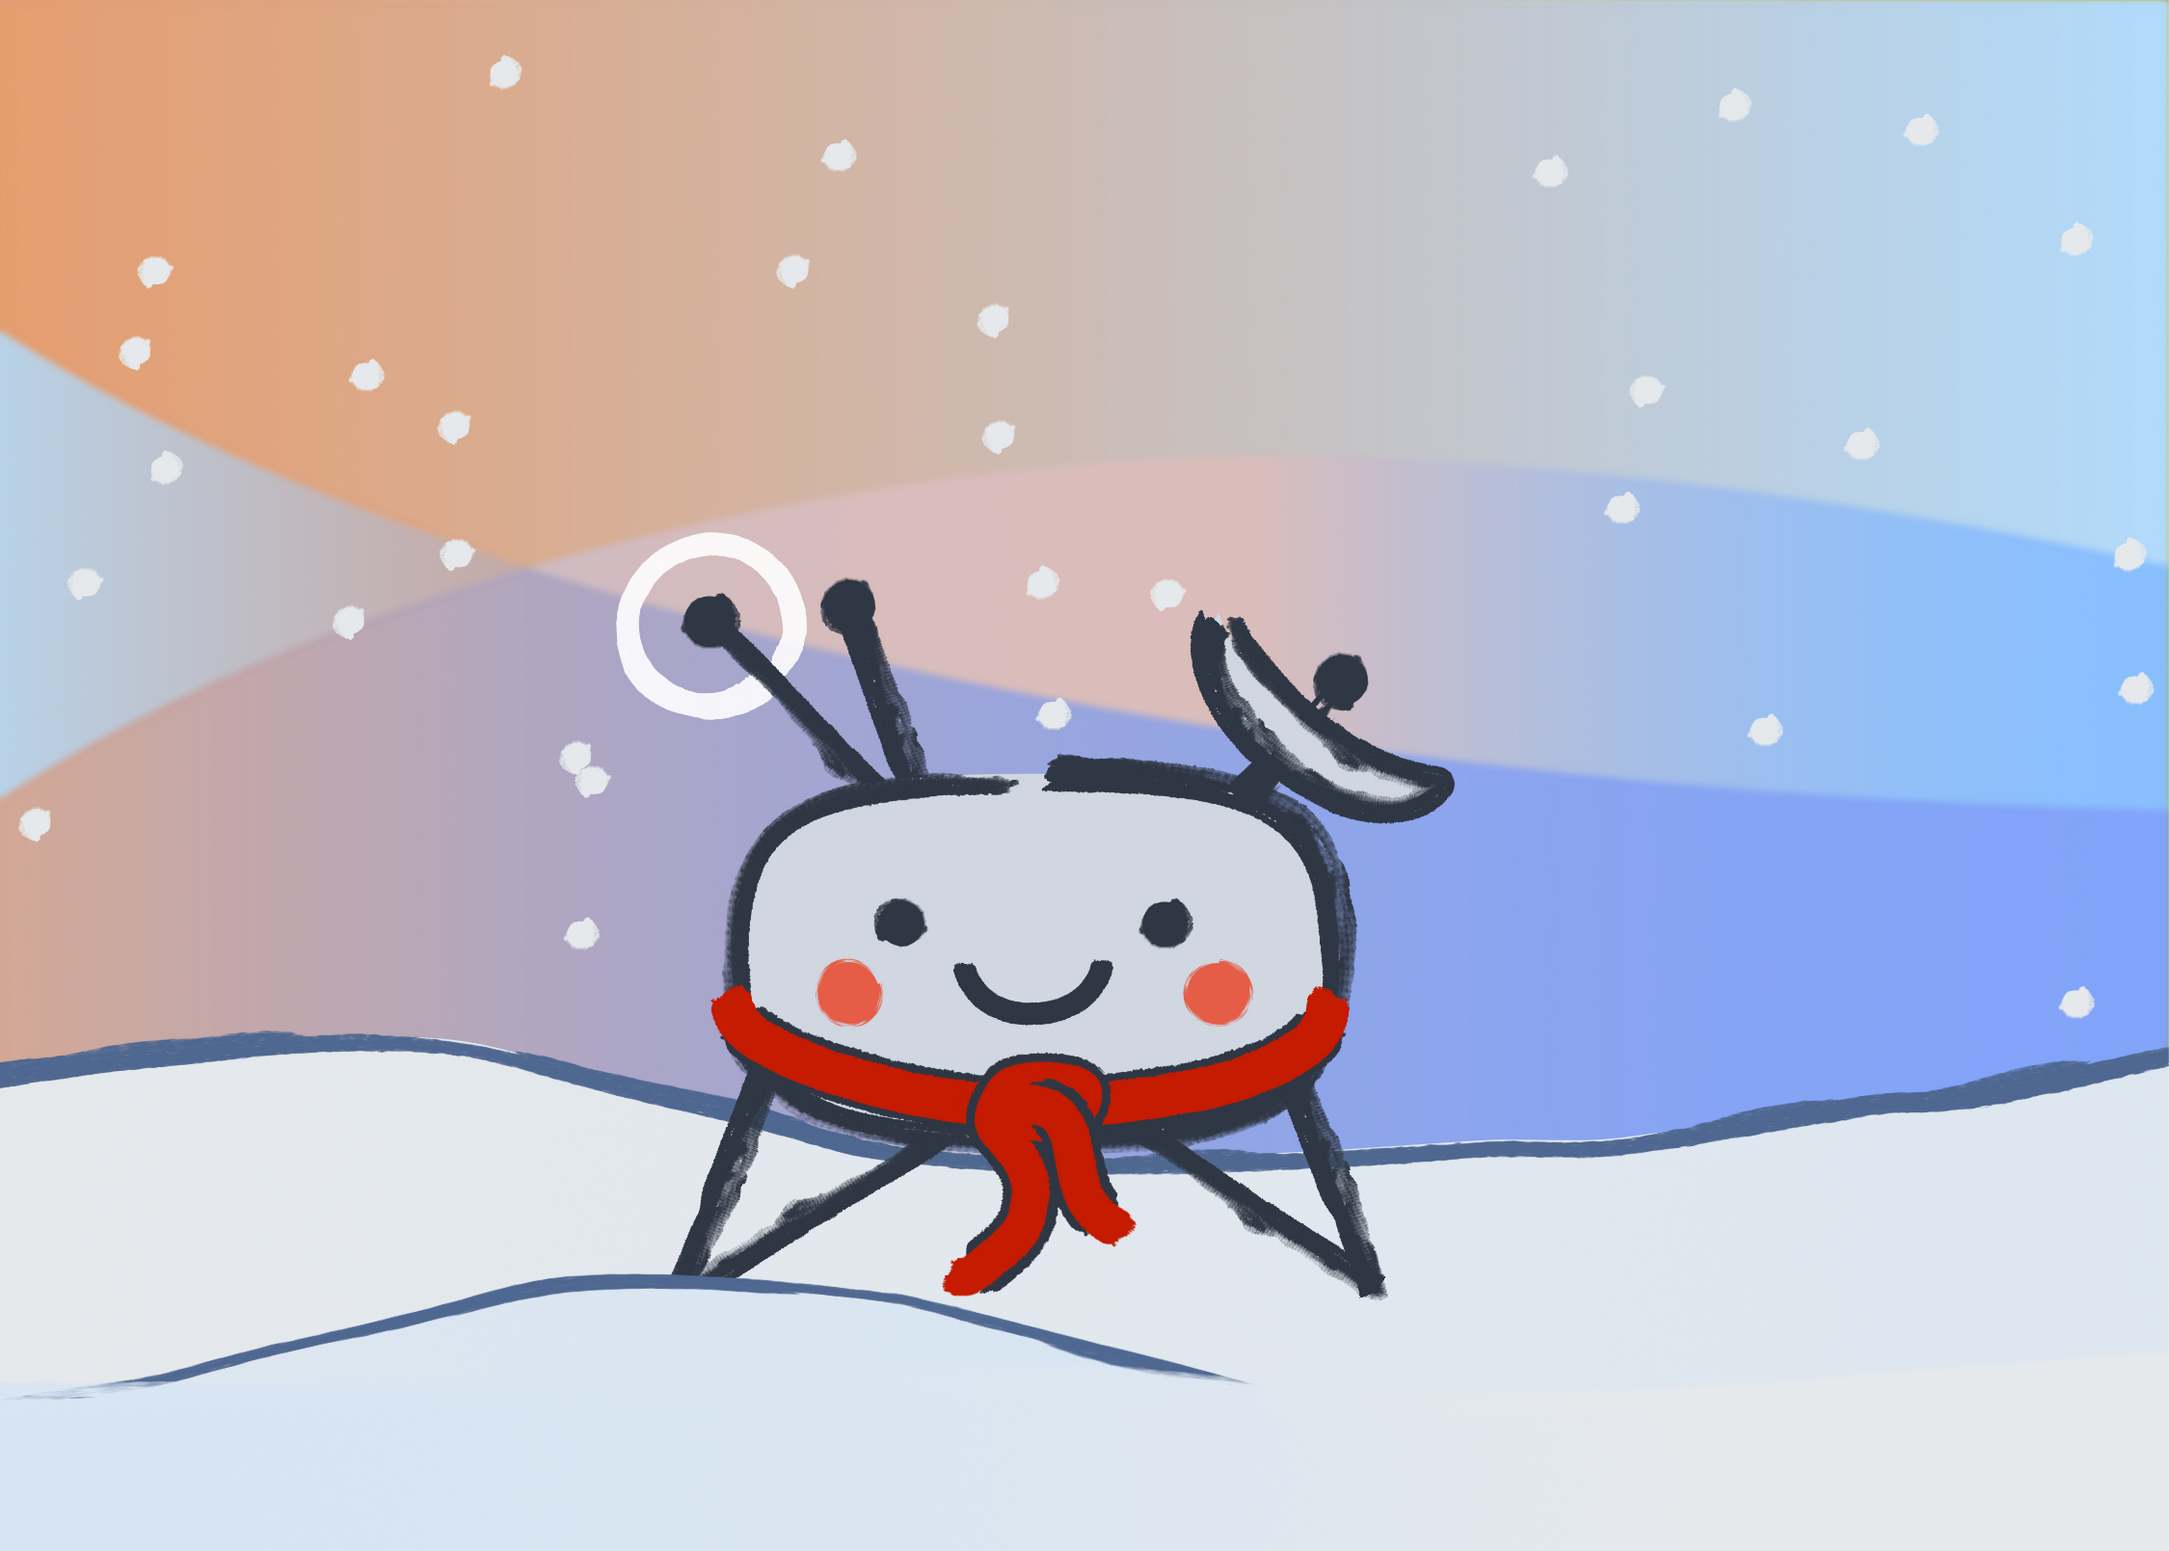 Happy holidays from TelemetryDeck